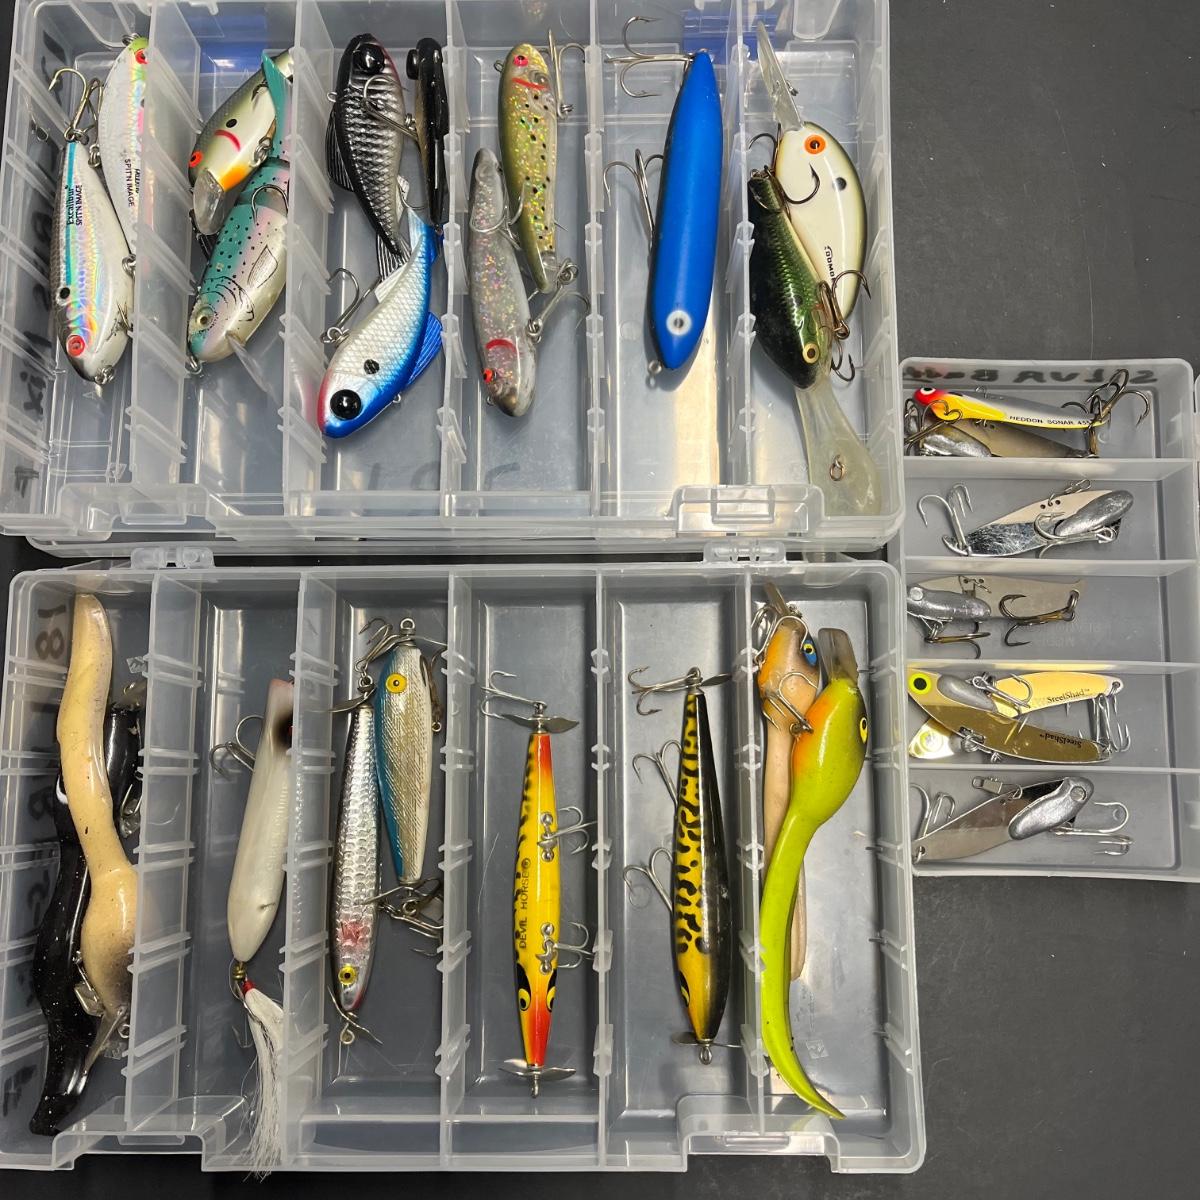 LOT 165B: Fishing Lures - Crankbaits, Spoons and More